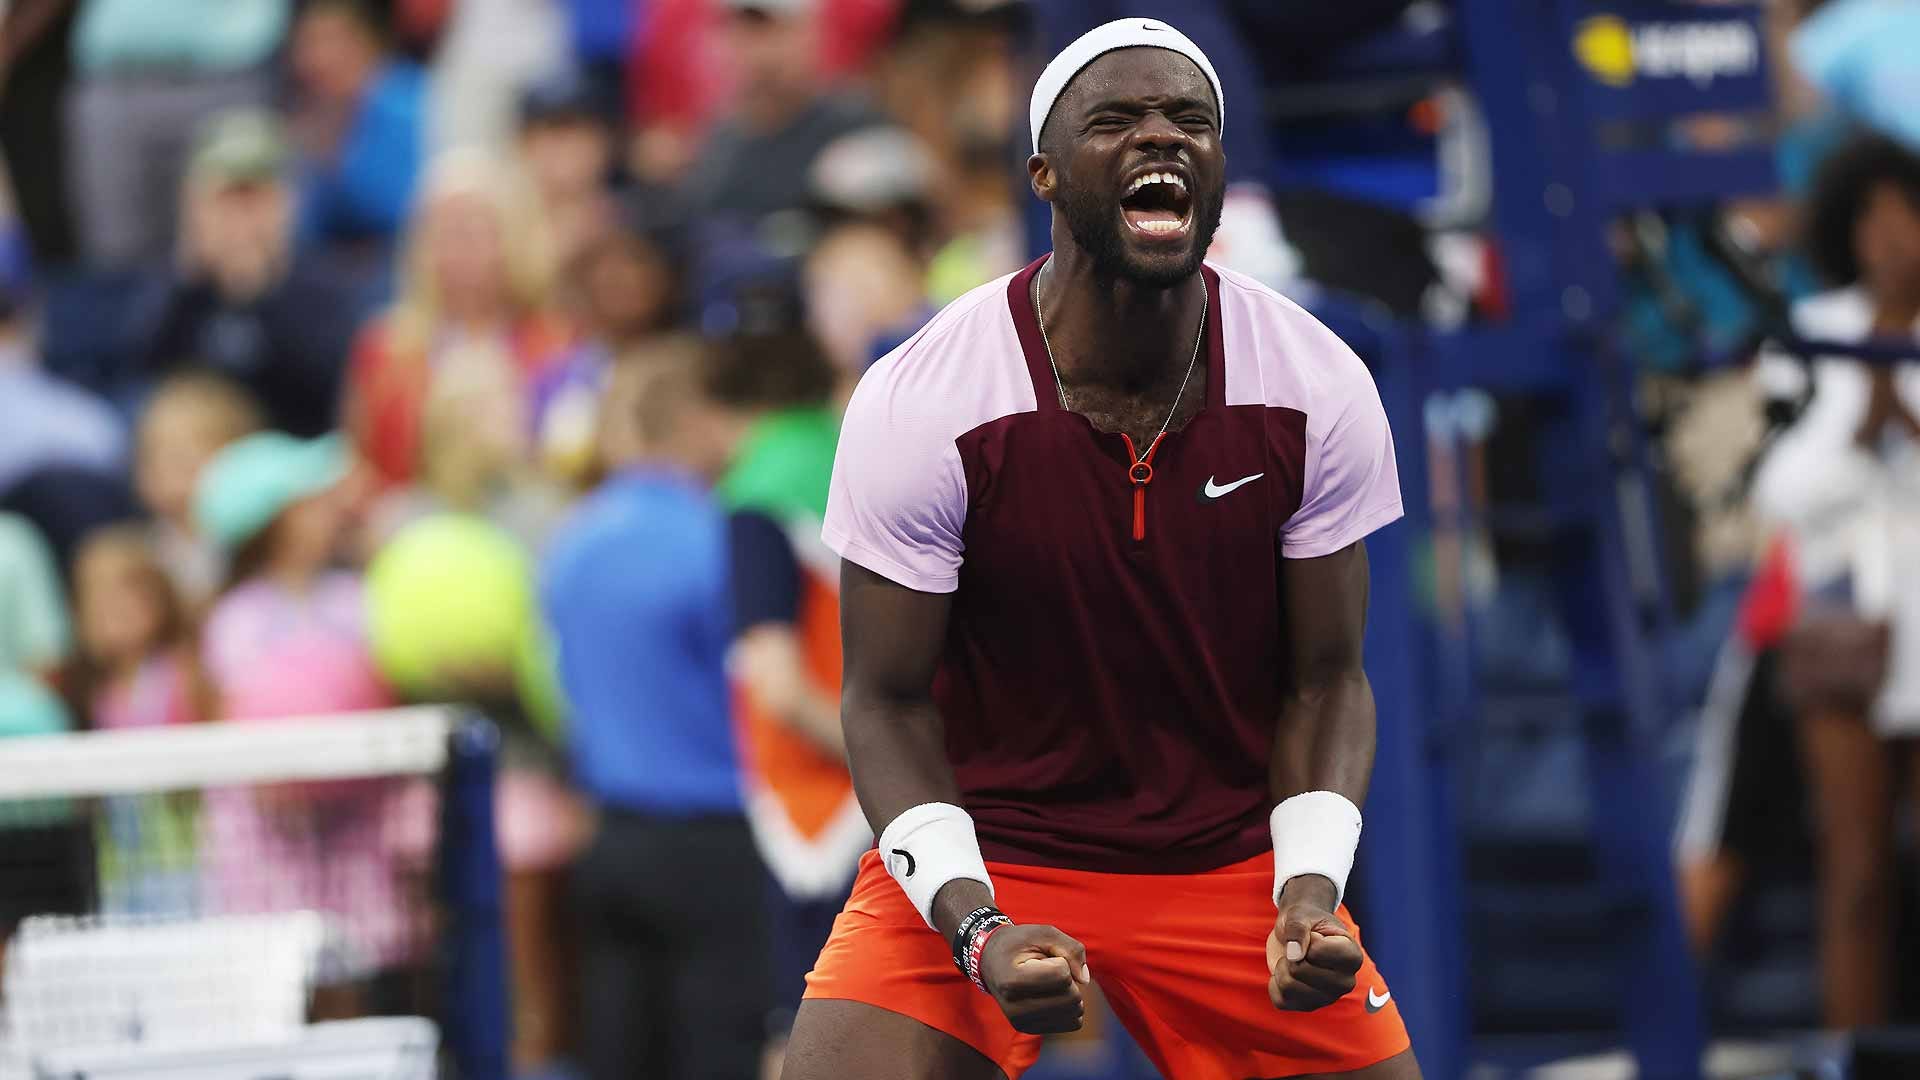 Frances Tiafoe From The Janitors Closet To The US Open Quarterfinal